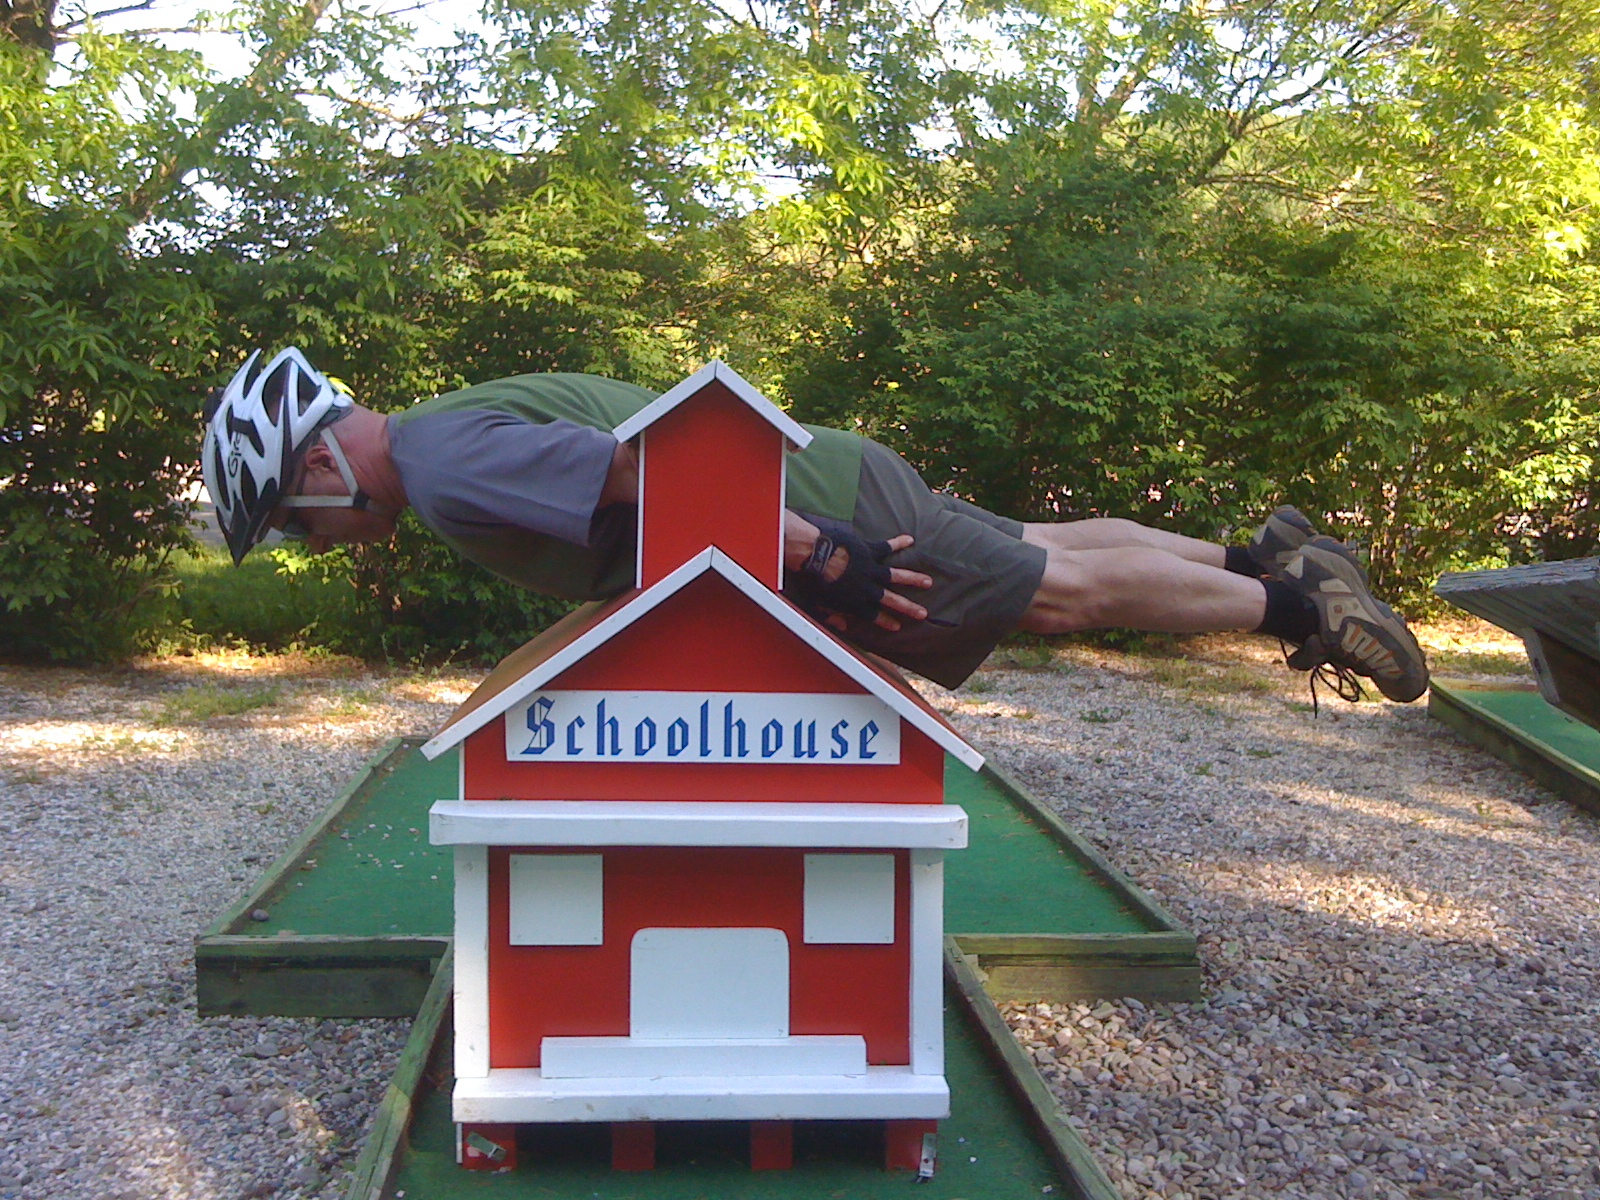 Mr. Brown planking a schoolhouse.